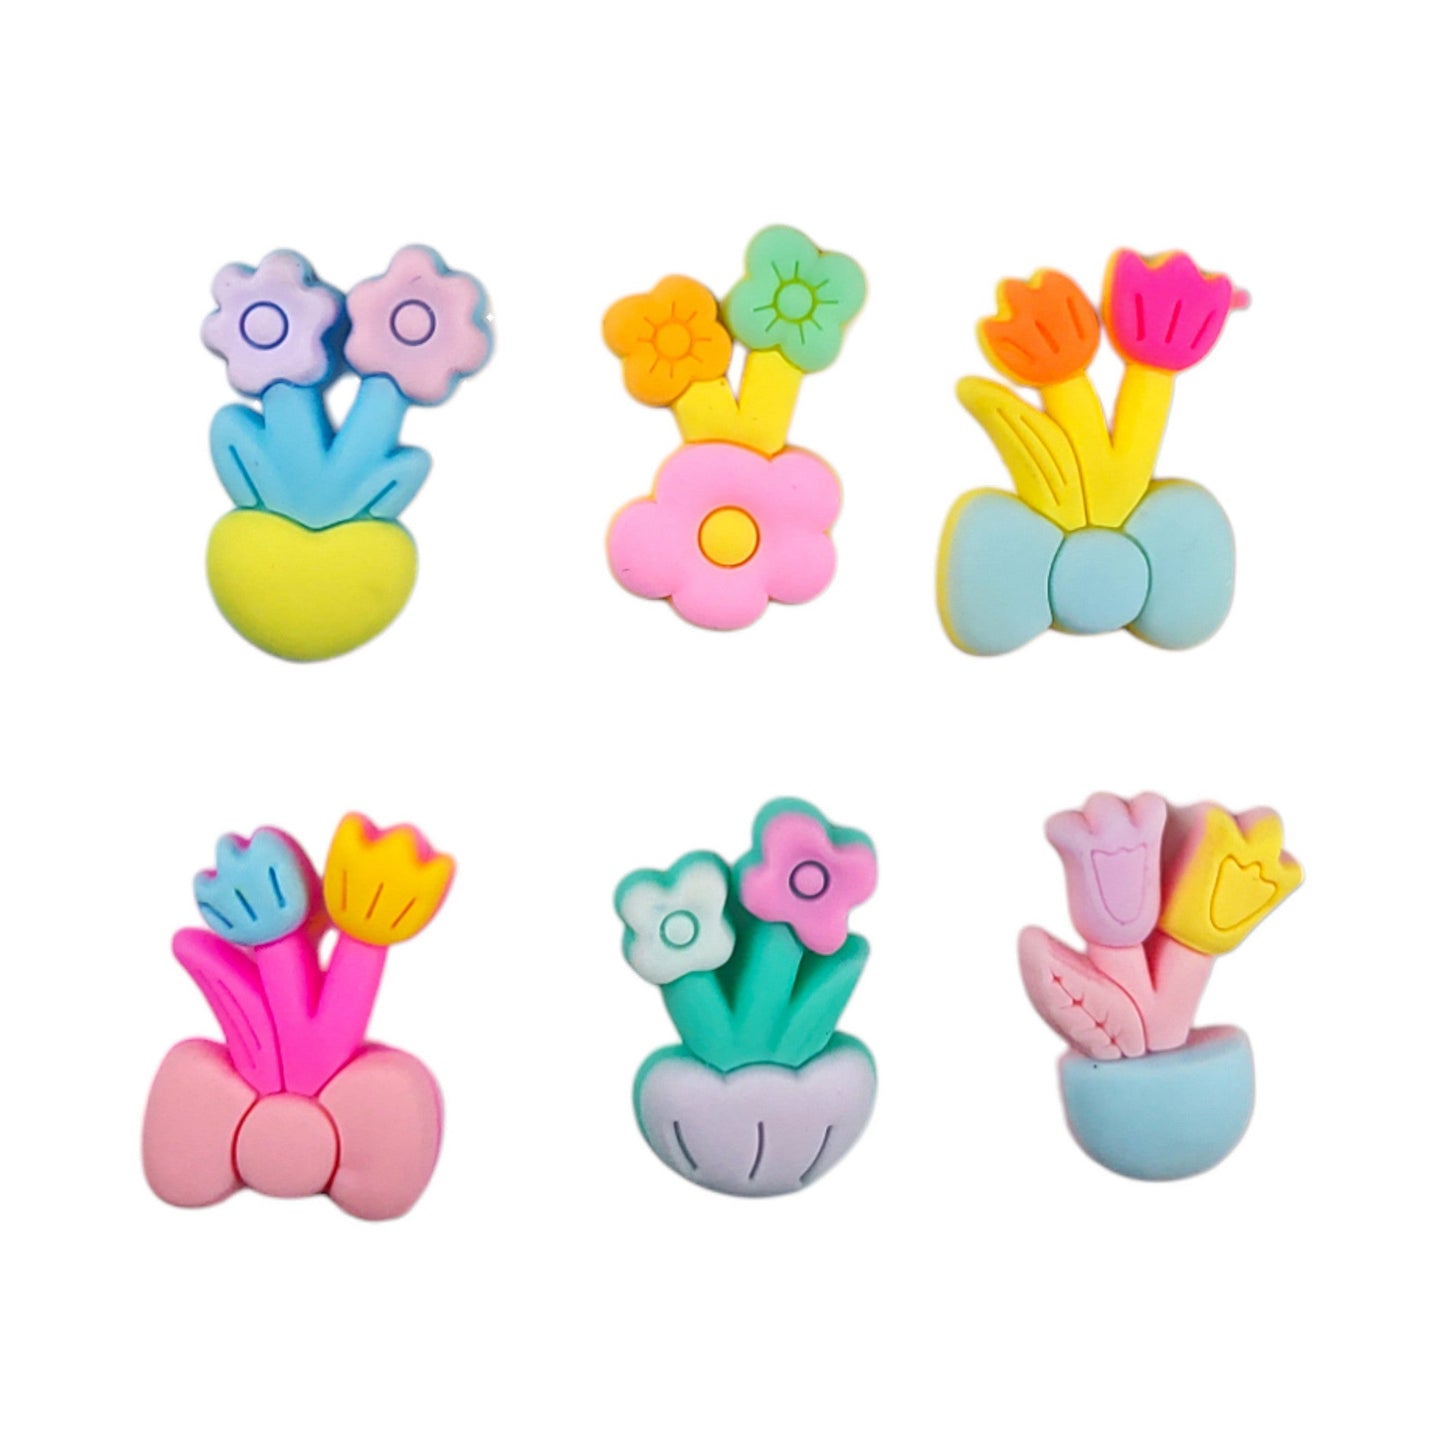 Flower Shap Soft Silicon Resin Motif For Craft Design Or Decoration,50 Pcs,MIX-13549